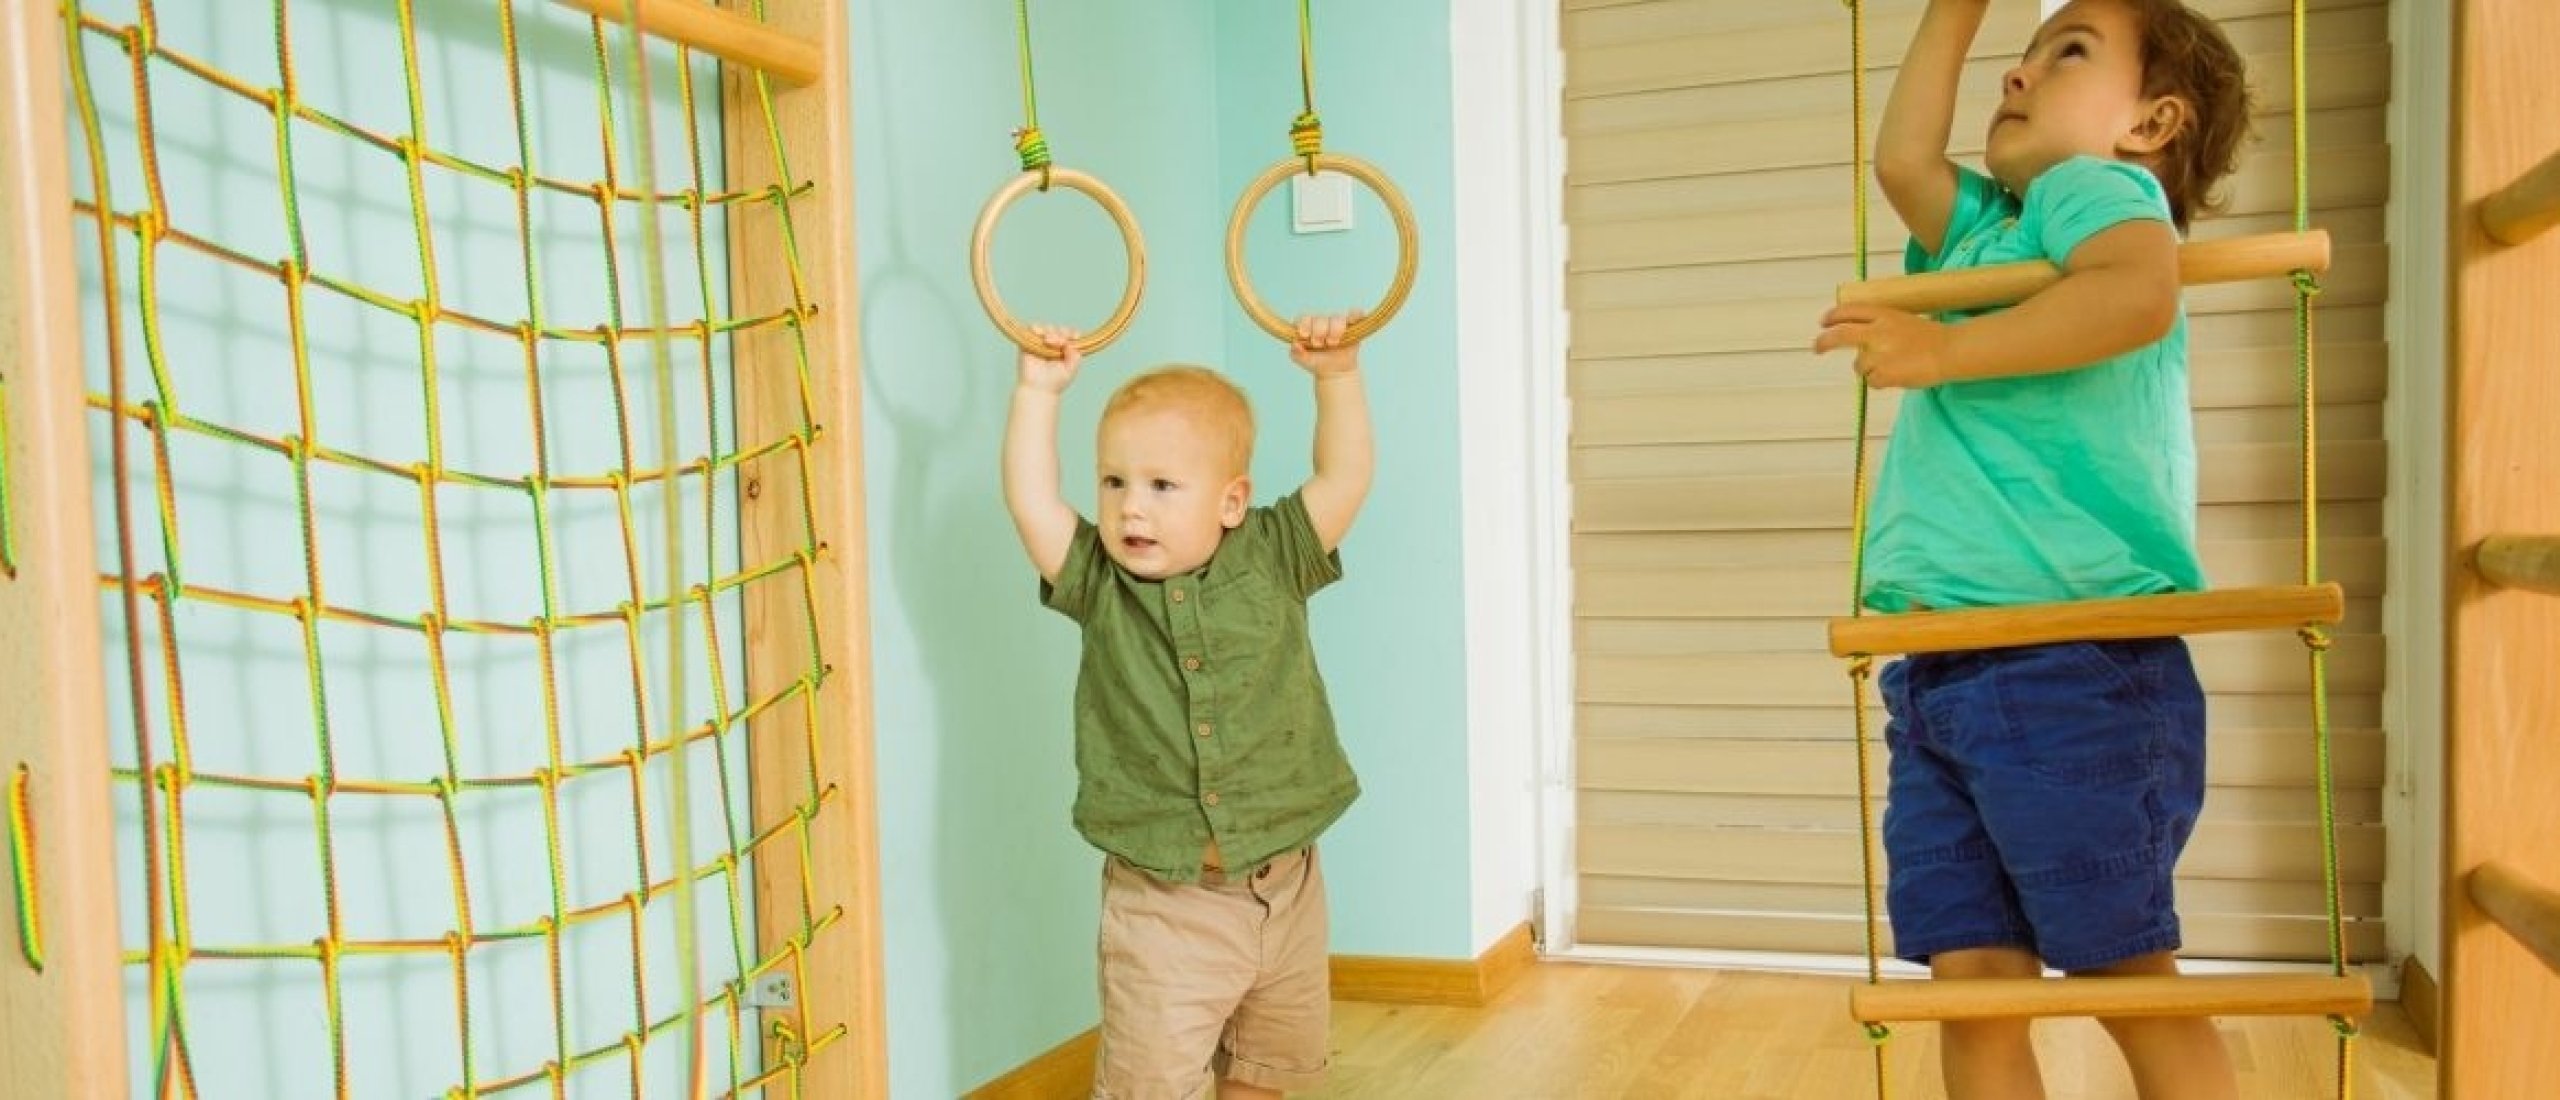 Move with your toddler; stimulate motor development!